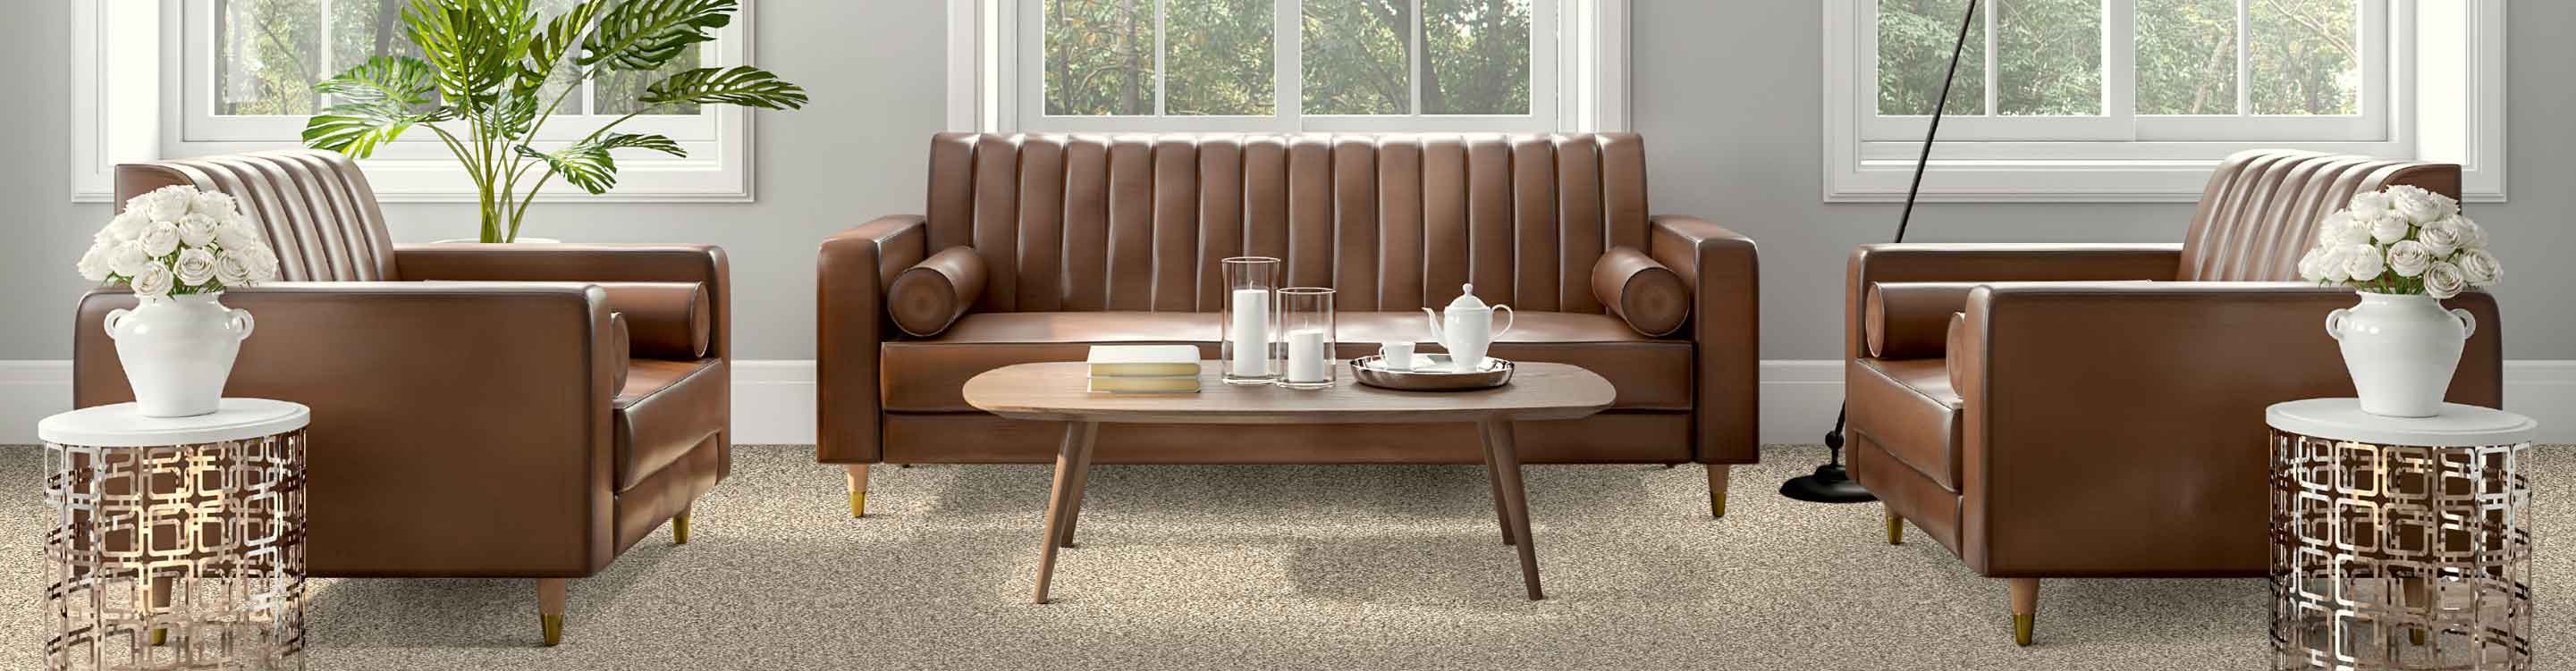 light brown carpet in living room with midcentury leather furniture